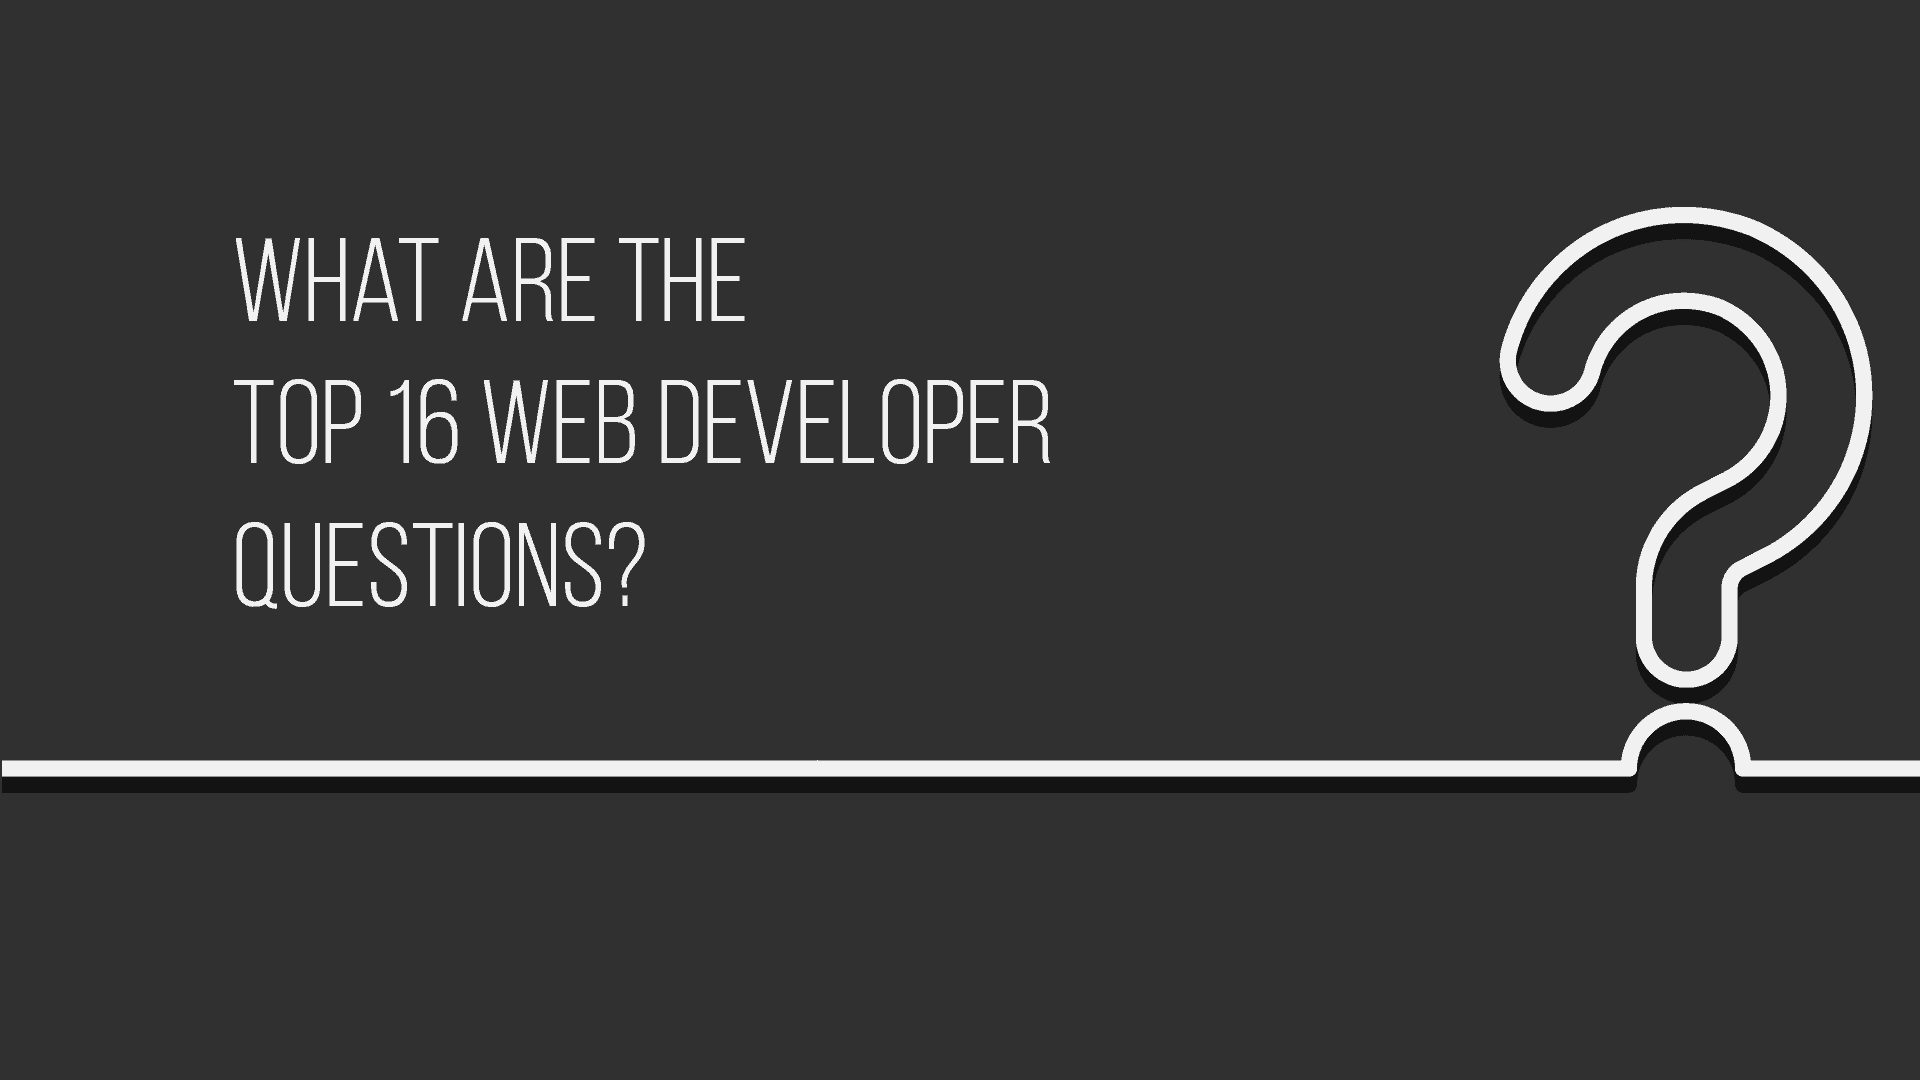 What Are the Top 16 Web Developer Questions?